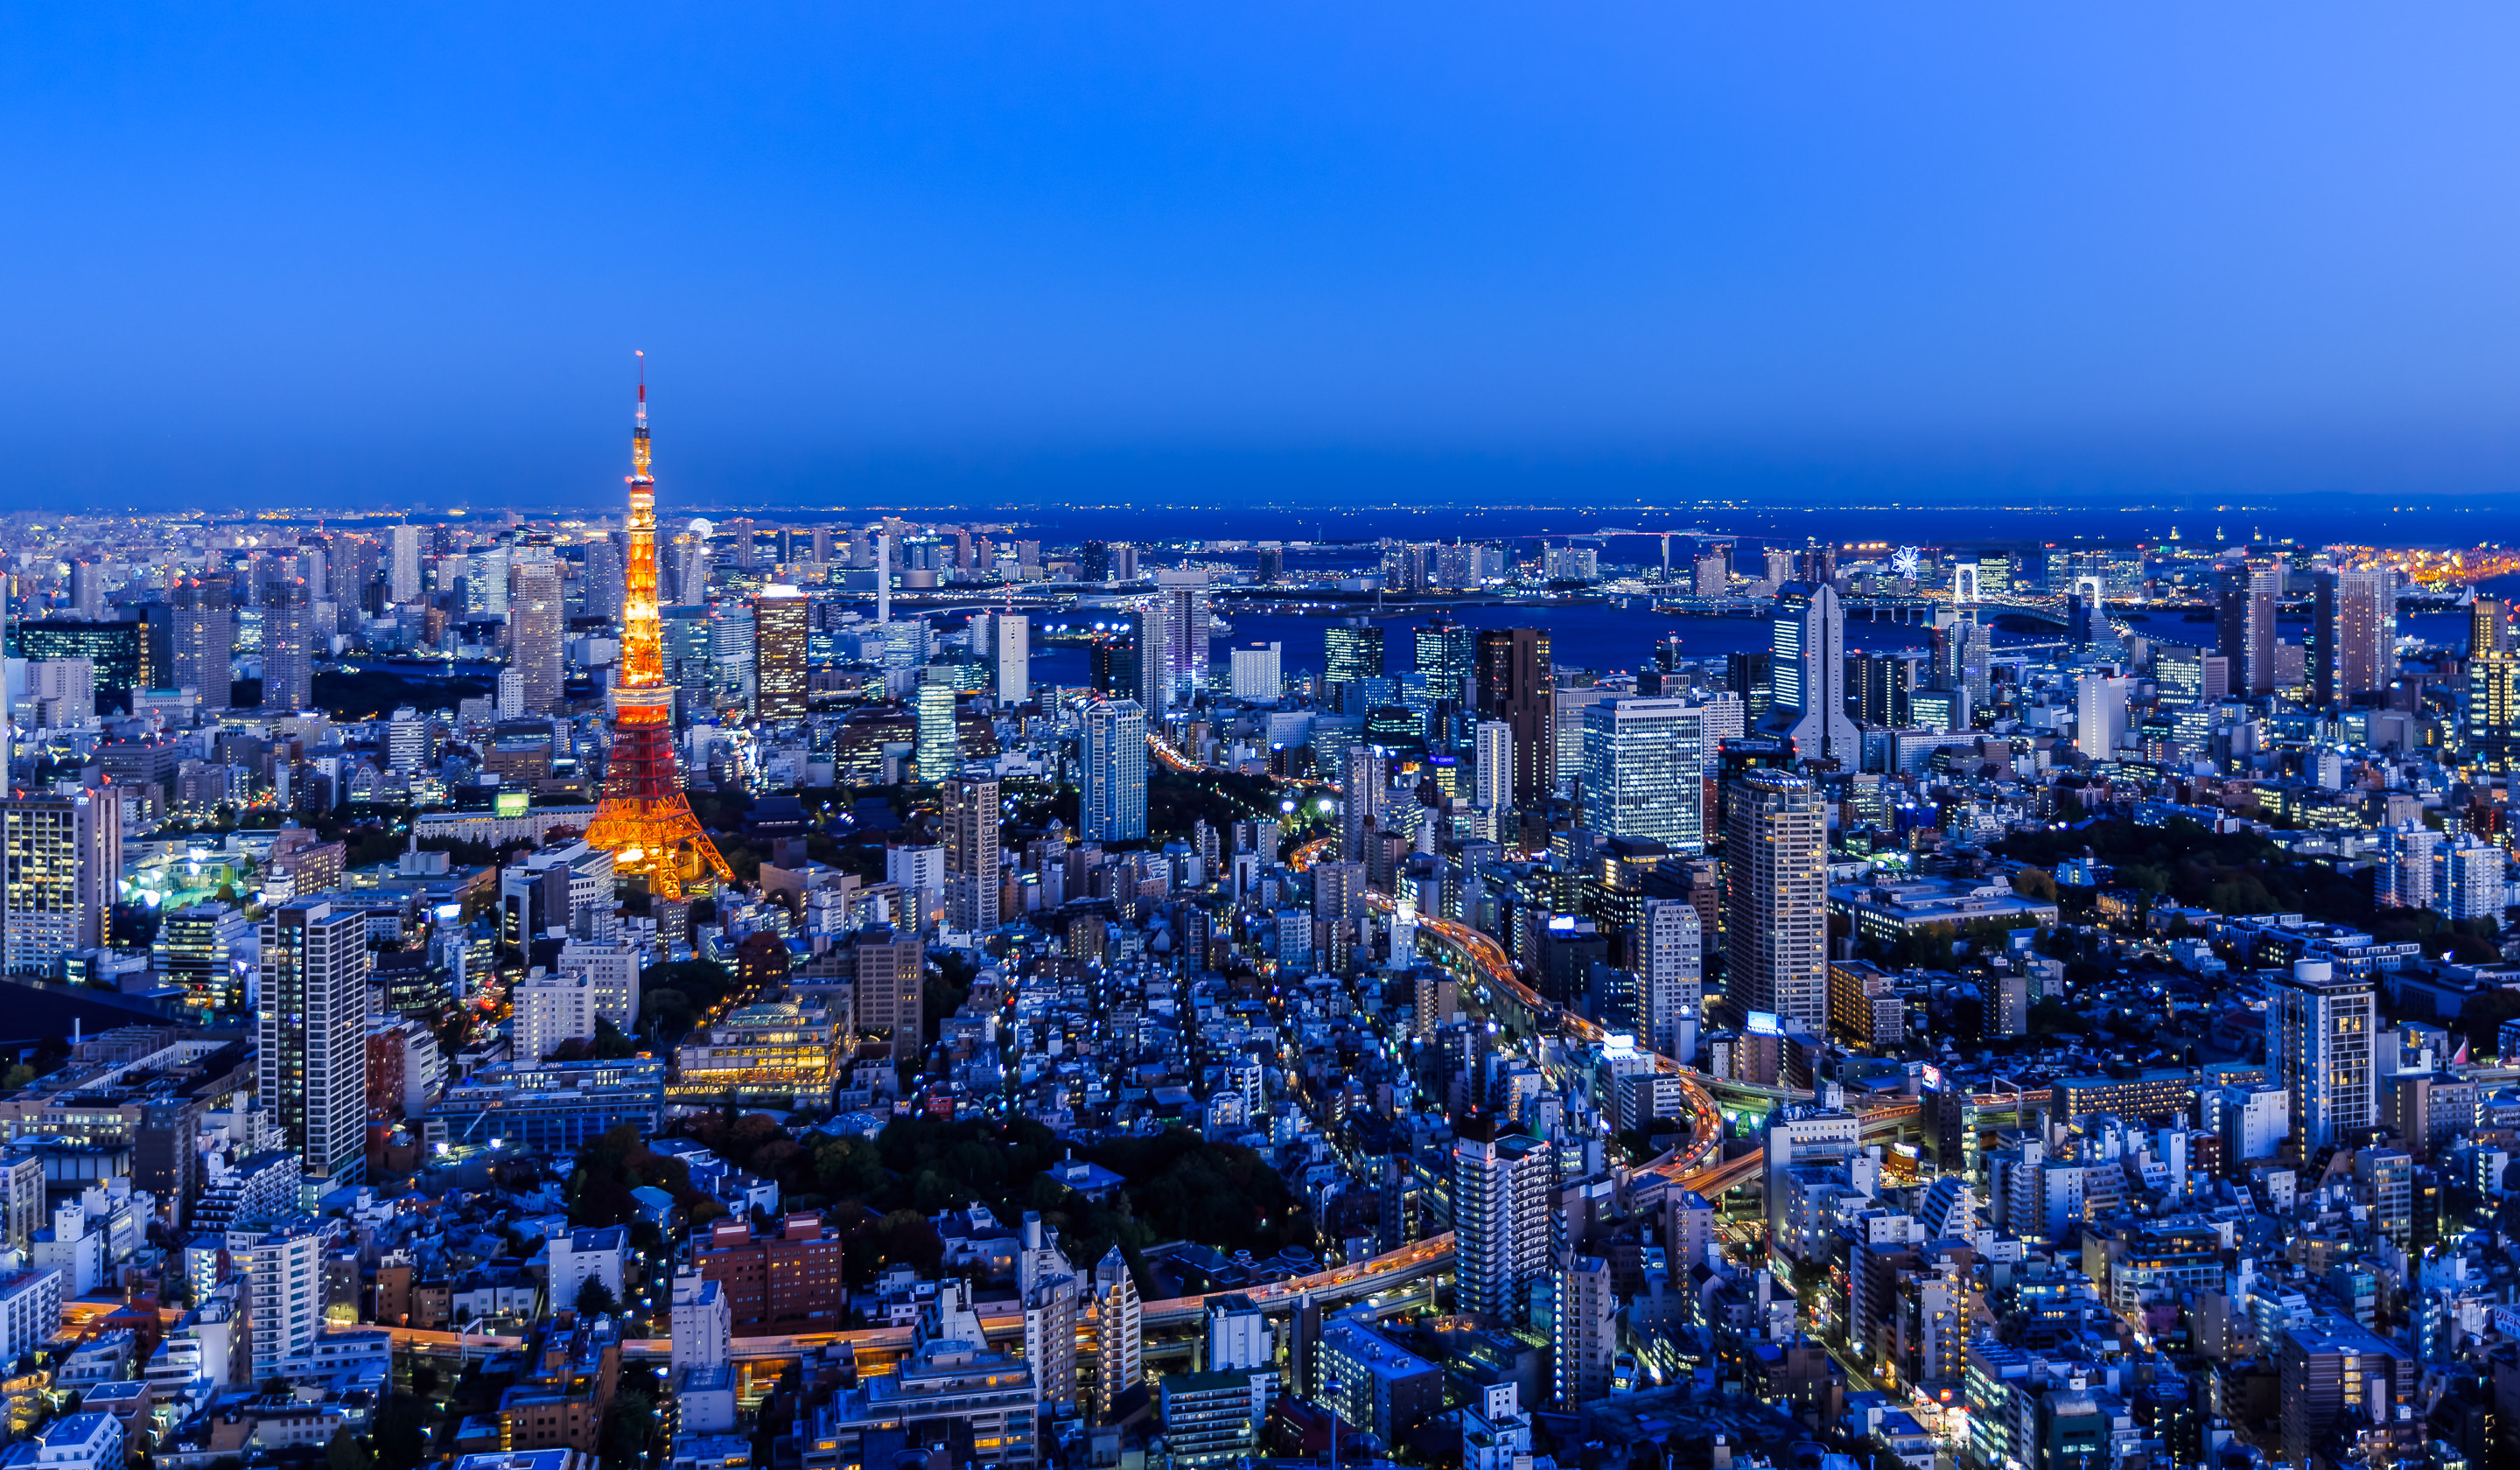 The perfect 10 day Japan Honeymoon itinerary to rejuvenate